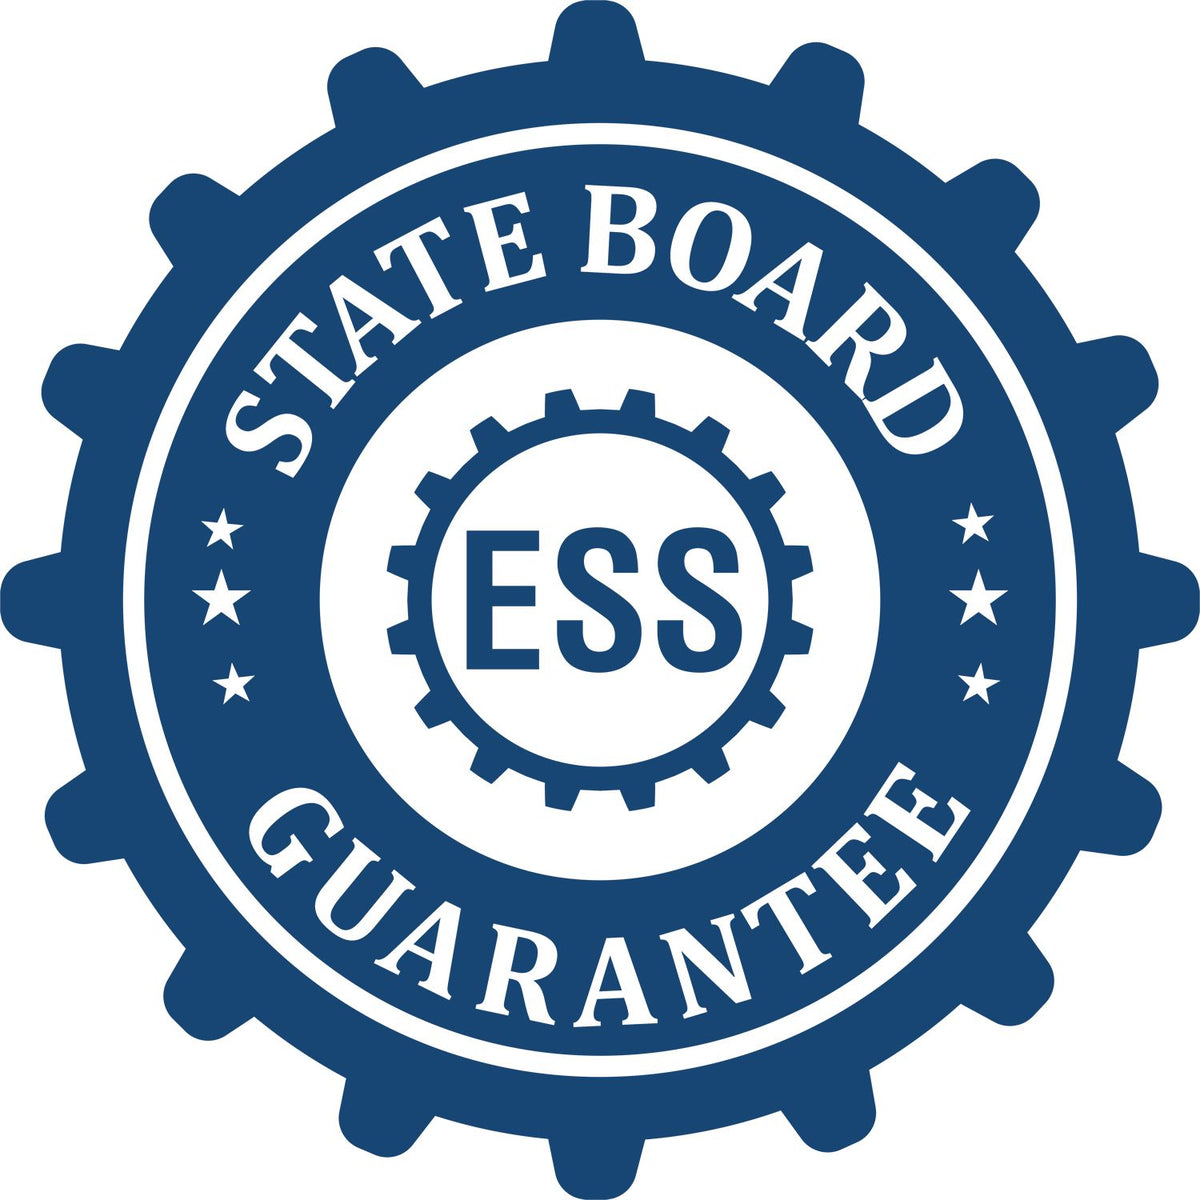 An emblem in a gear shape illustrating a state board guarantee for the Digital Rhode Island PE Stamp and Electronic Seal for Rhode Island Engineer product.